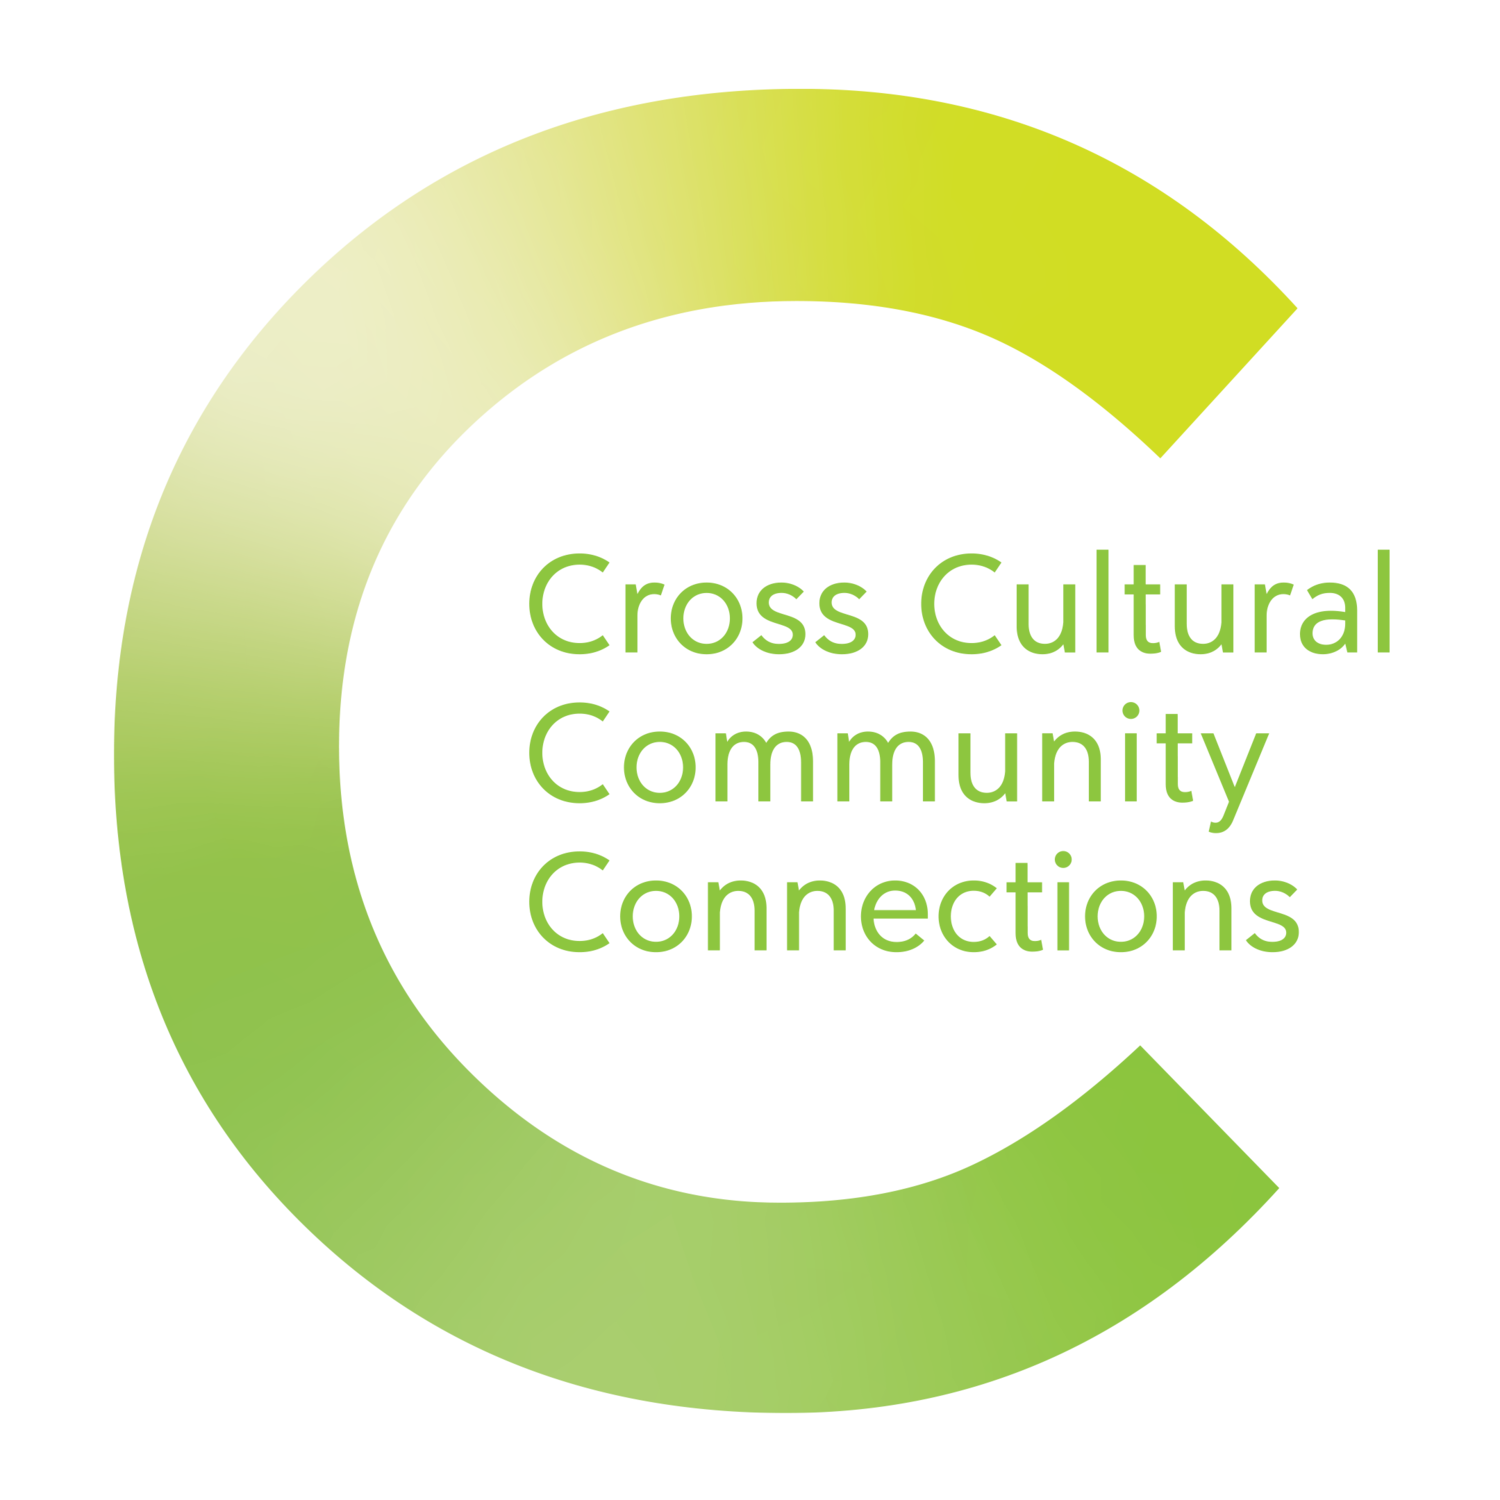 Cross Cultural Community Connections